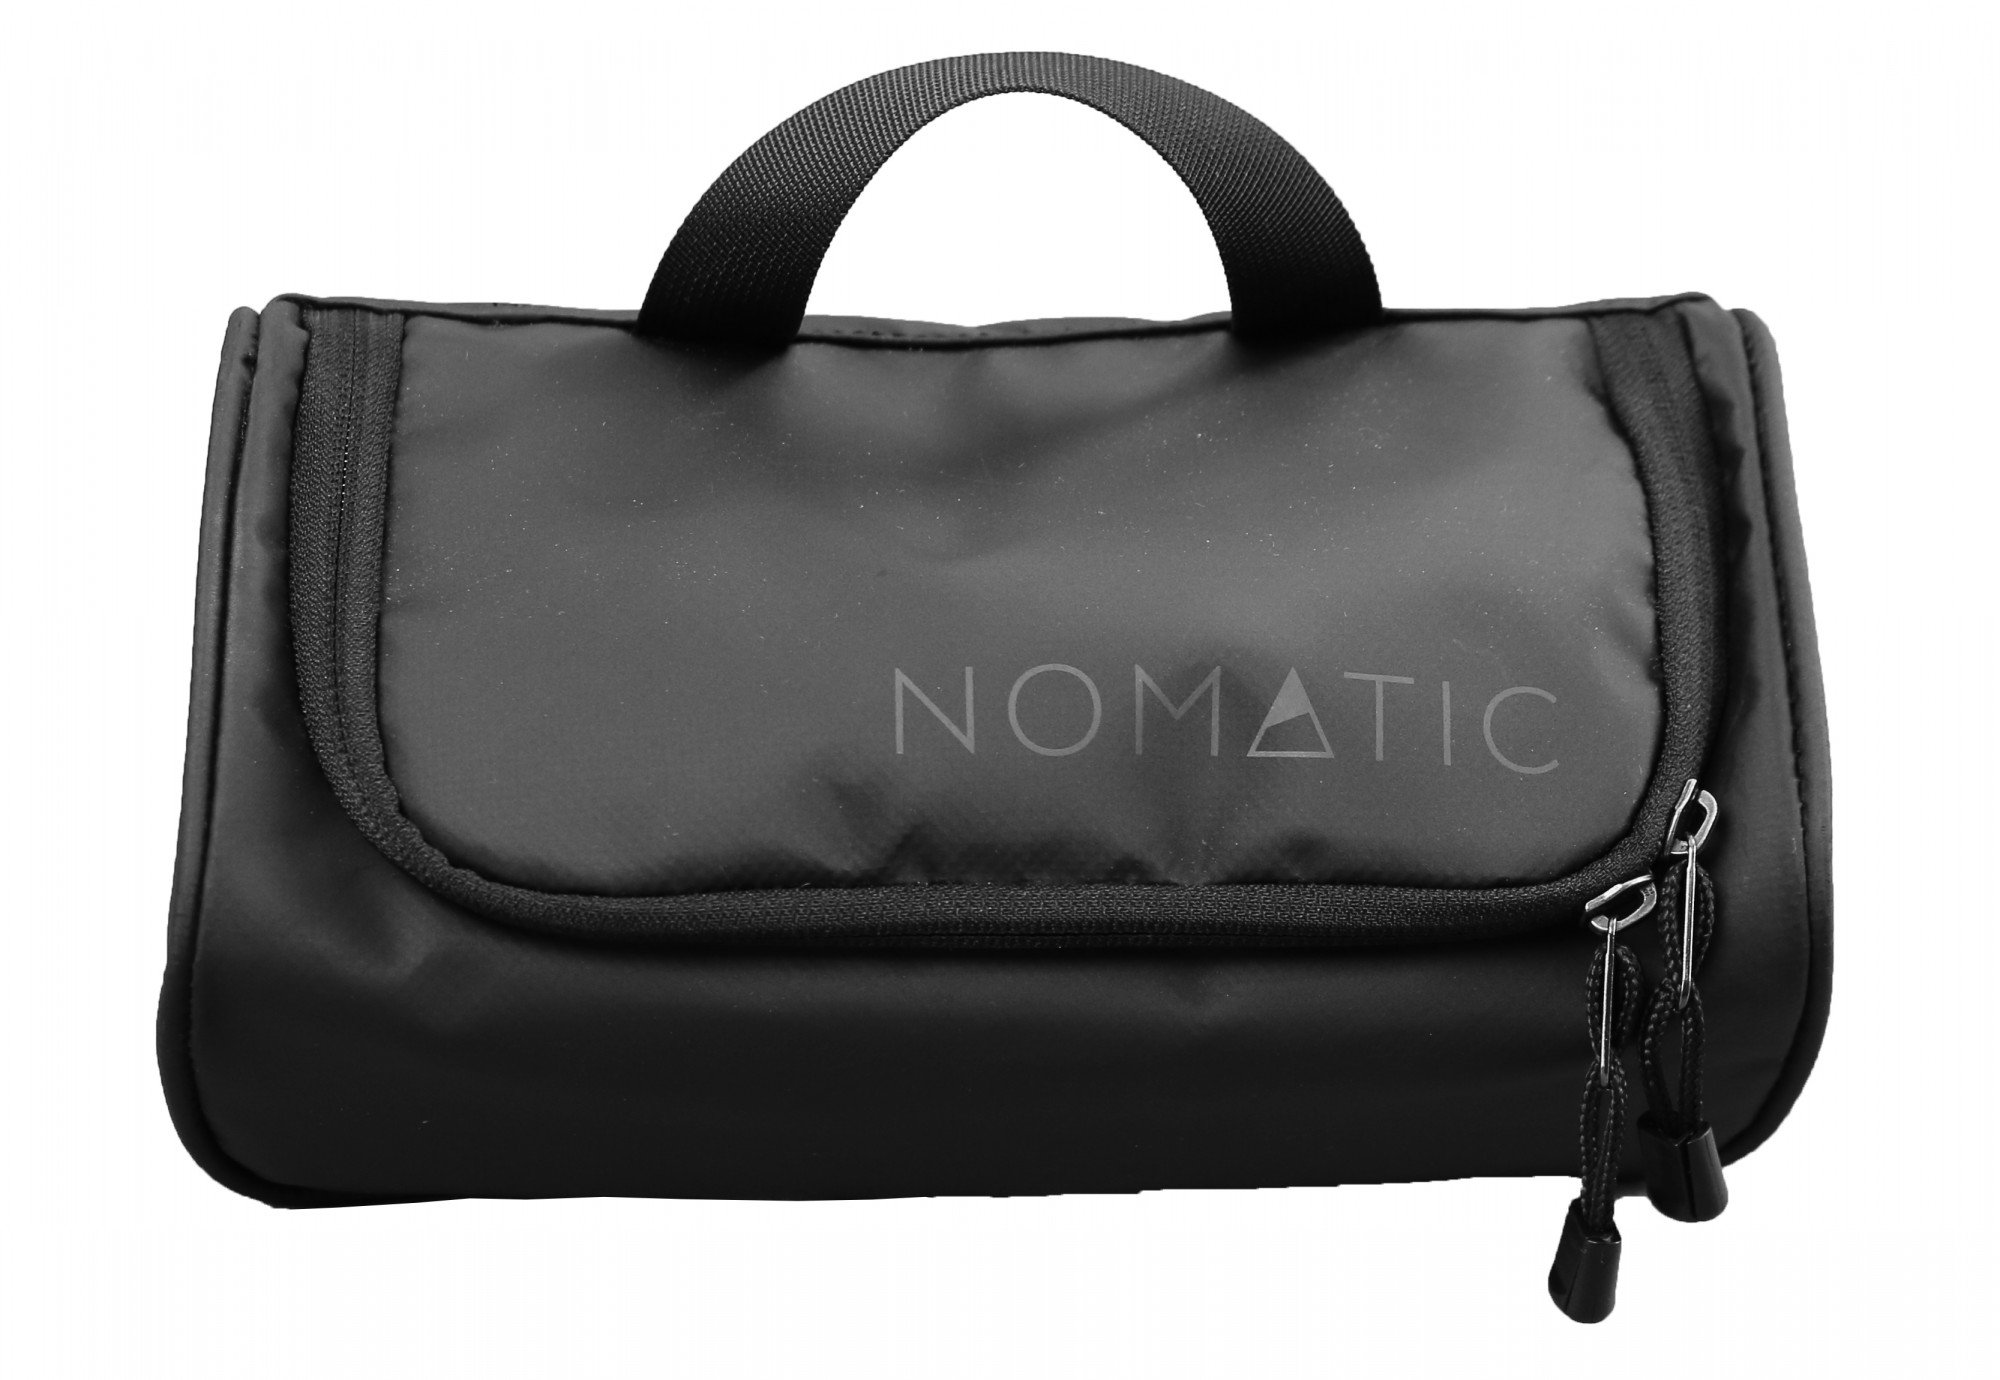 nomatic-toiletry-bag-review-the-best-shower-bag-in-the-travelsphere